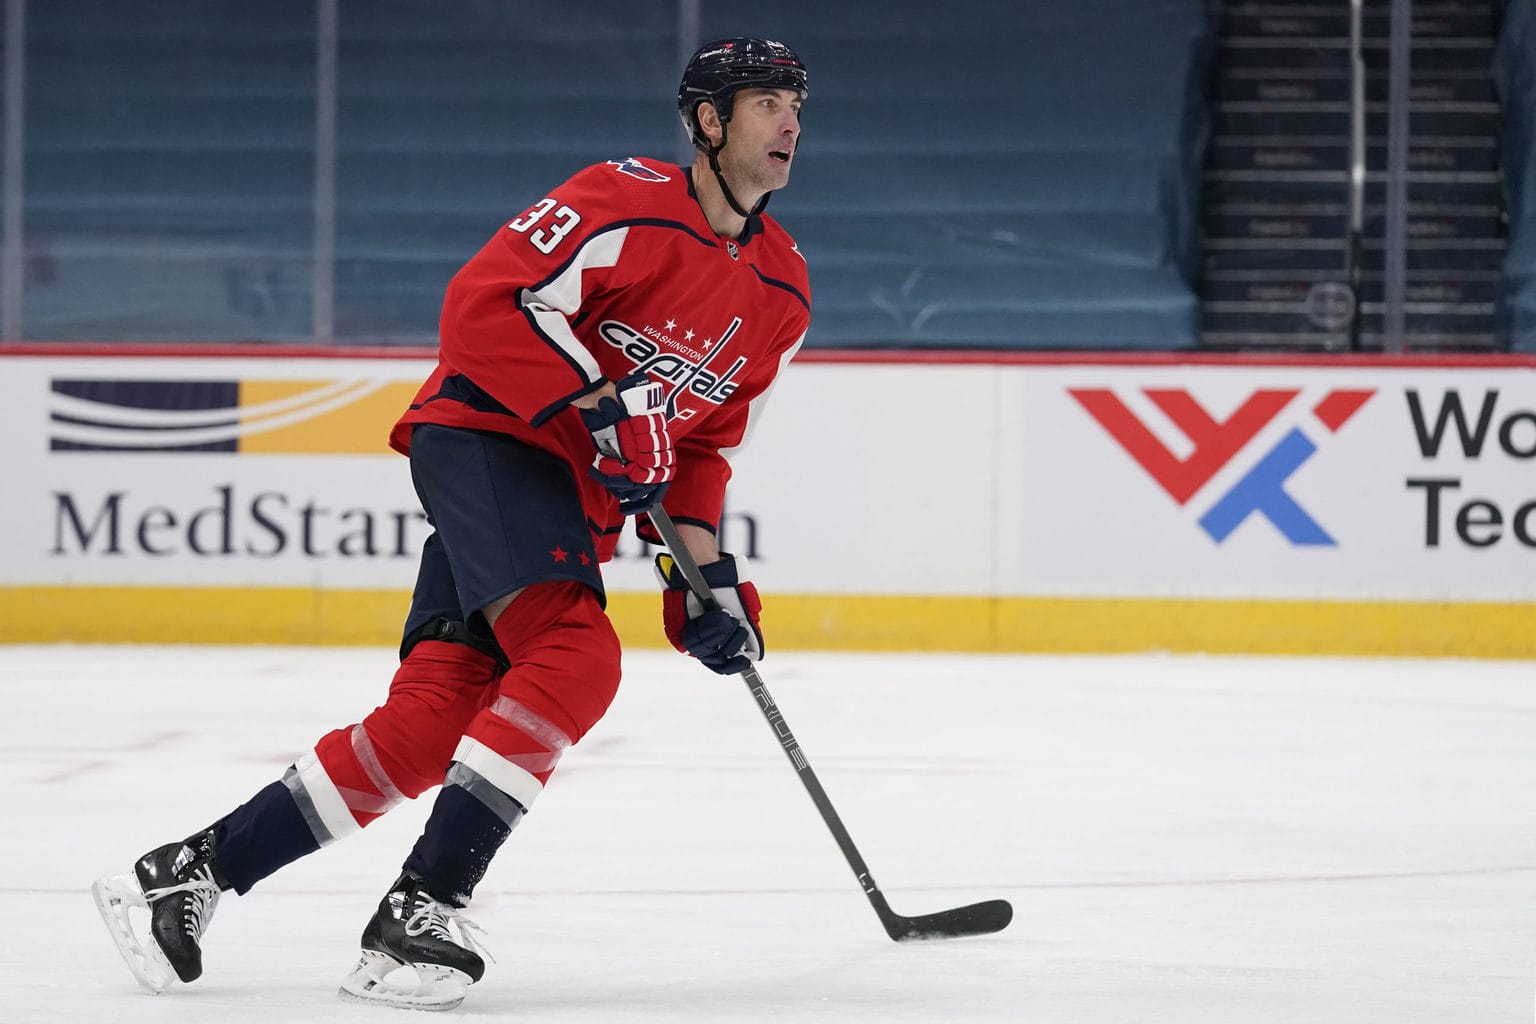 CapitalsPR on X: The Capitals have agreed to terms with Zdeno